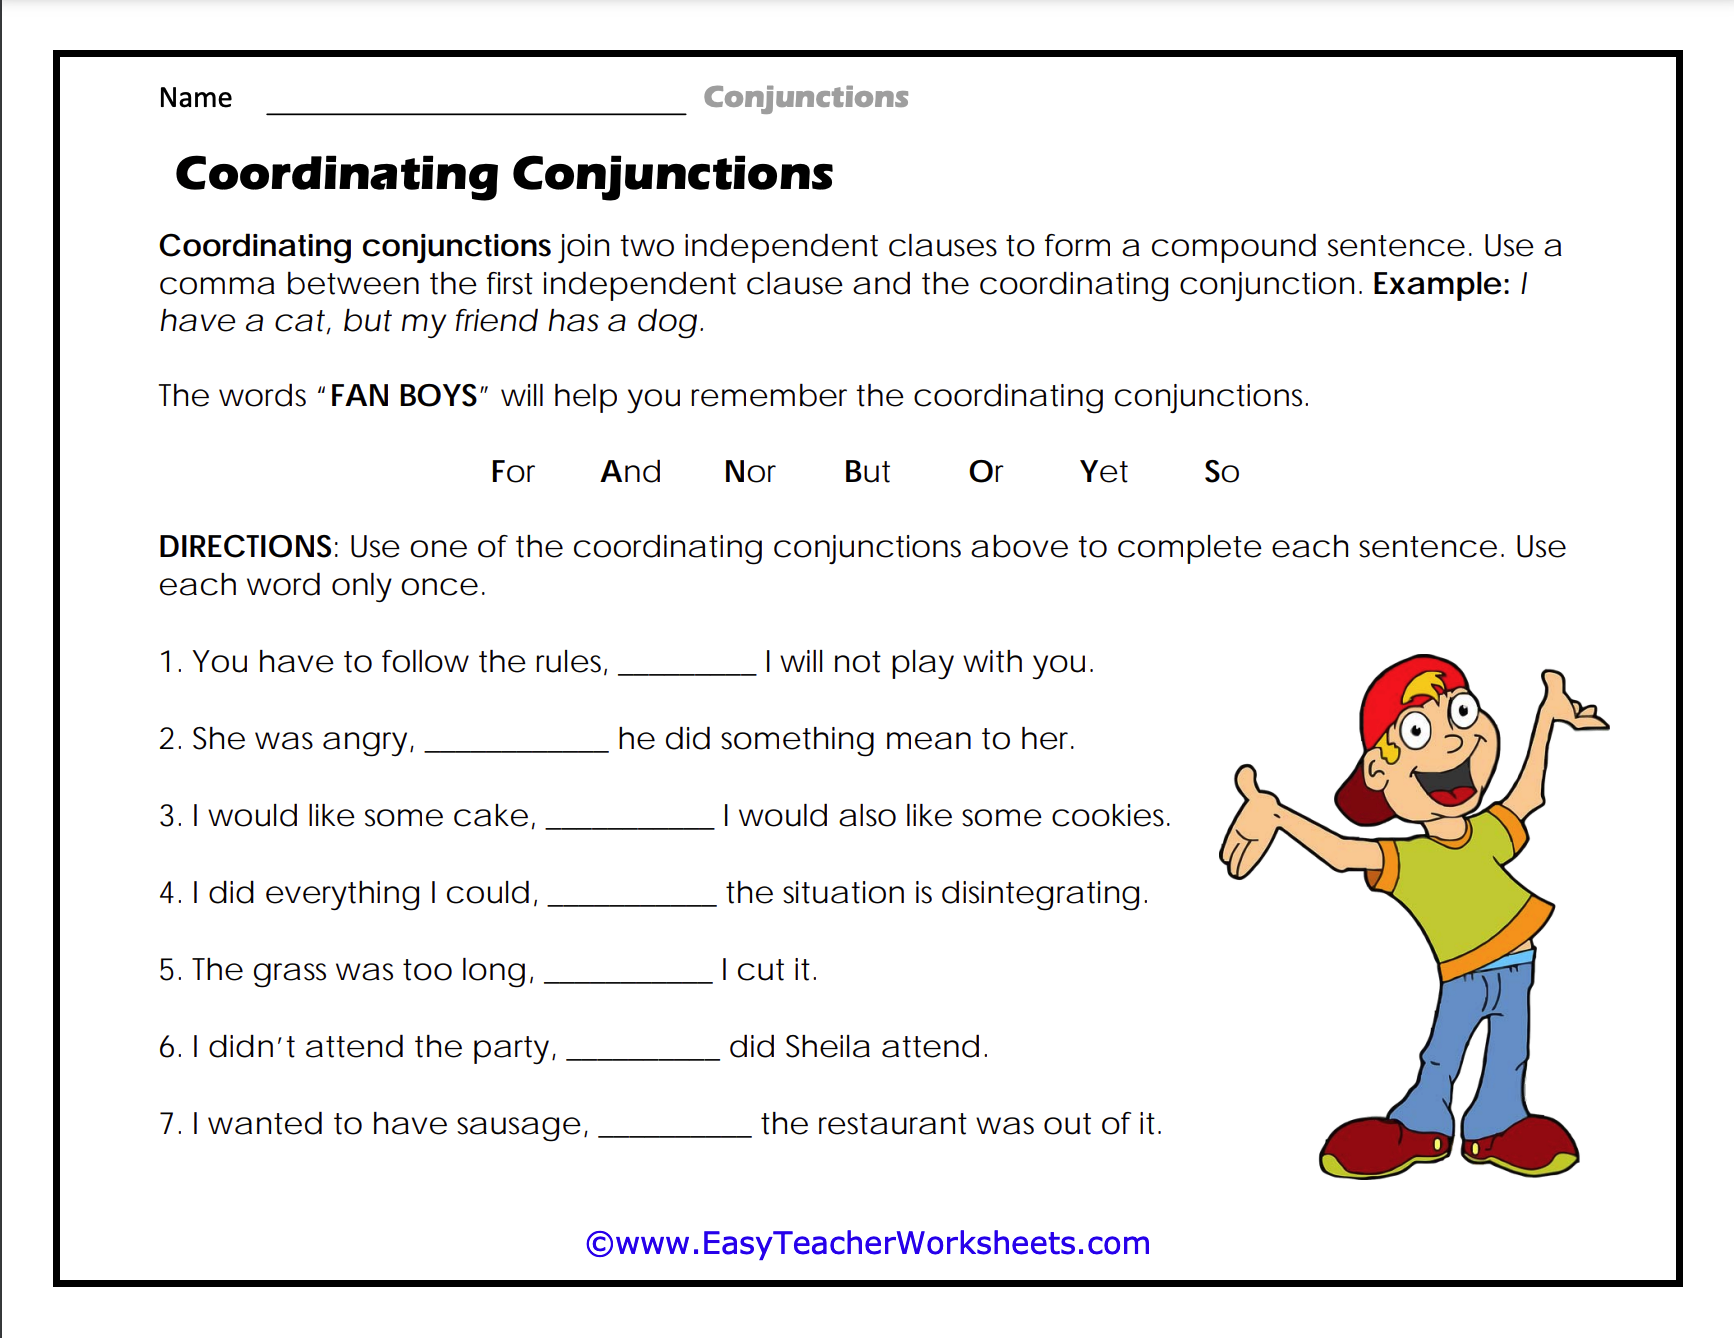 18-activities-to-master-coordinating-conjunctions-fanboys-teaching